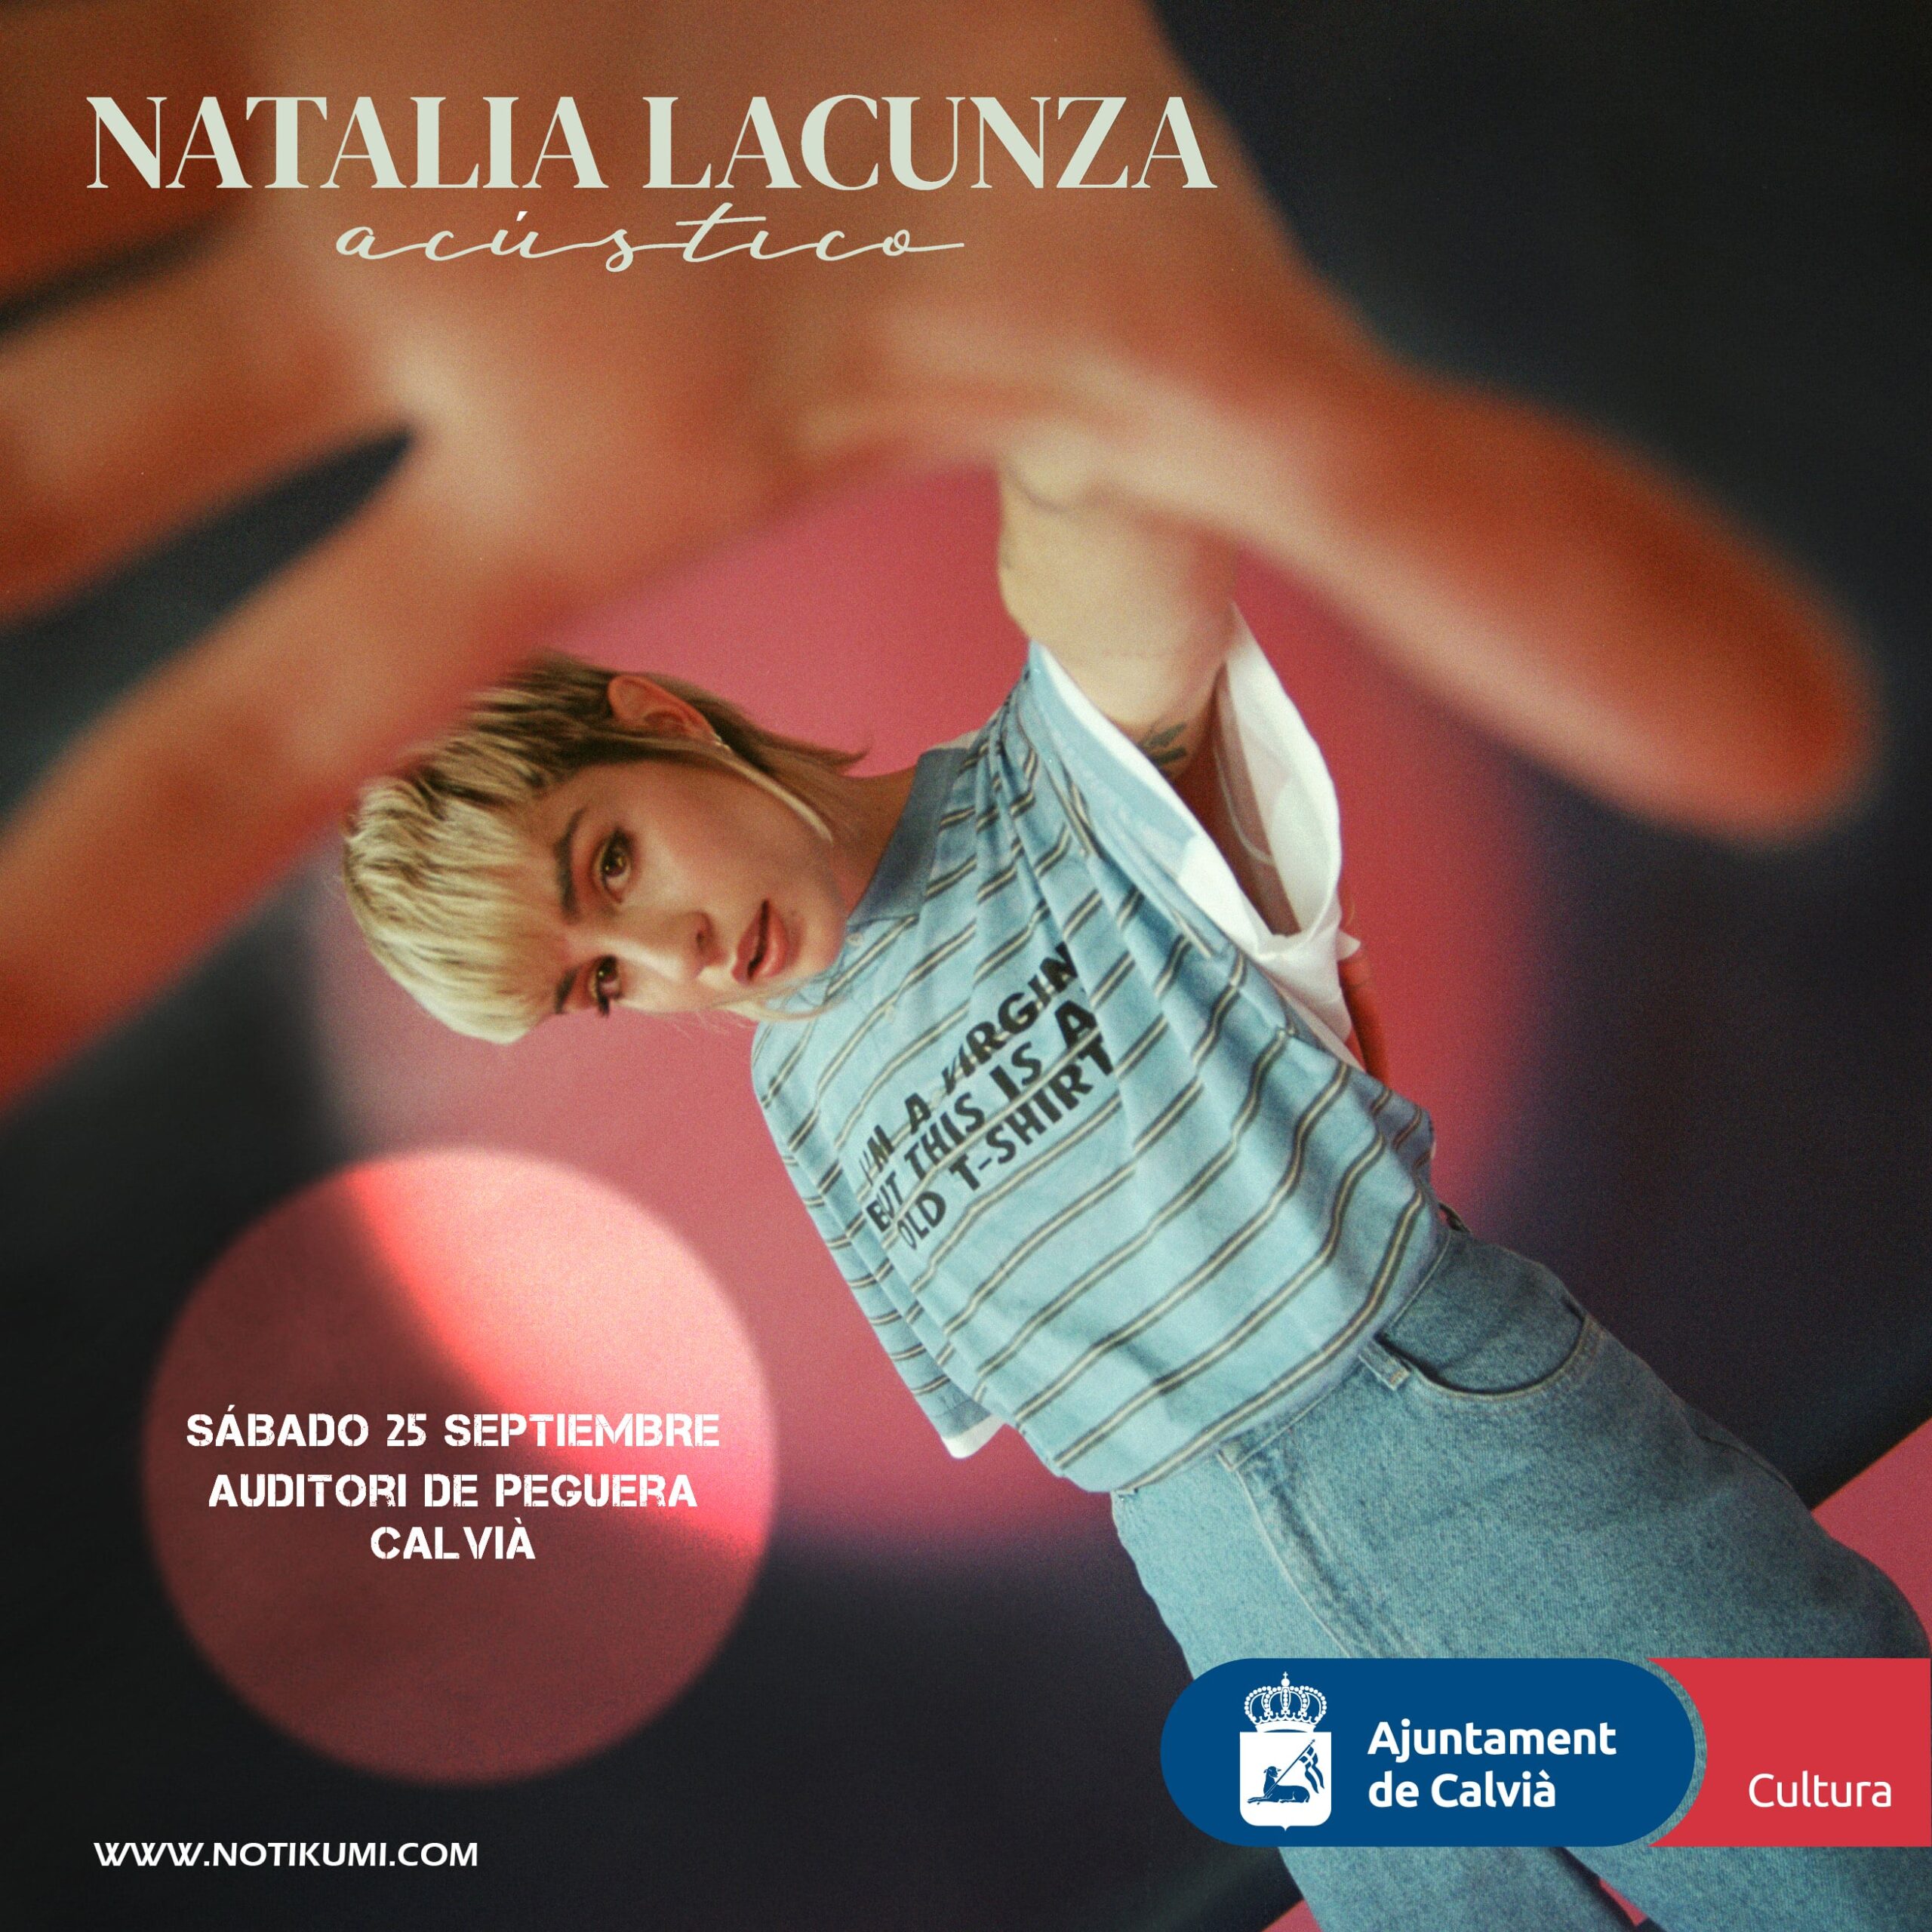 Natalia Lacunza will bring her acoustic set to Peguera in January